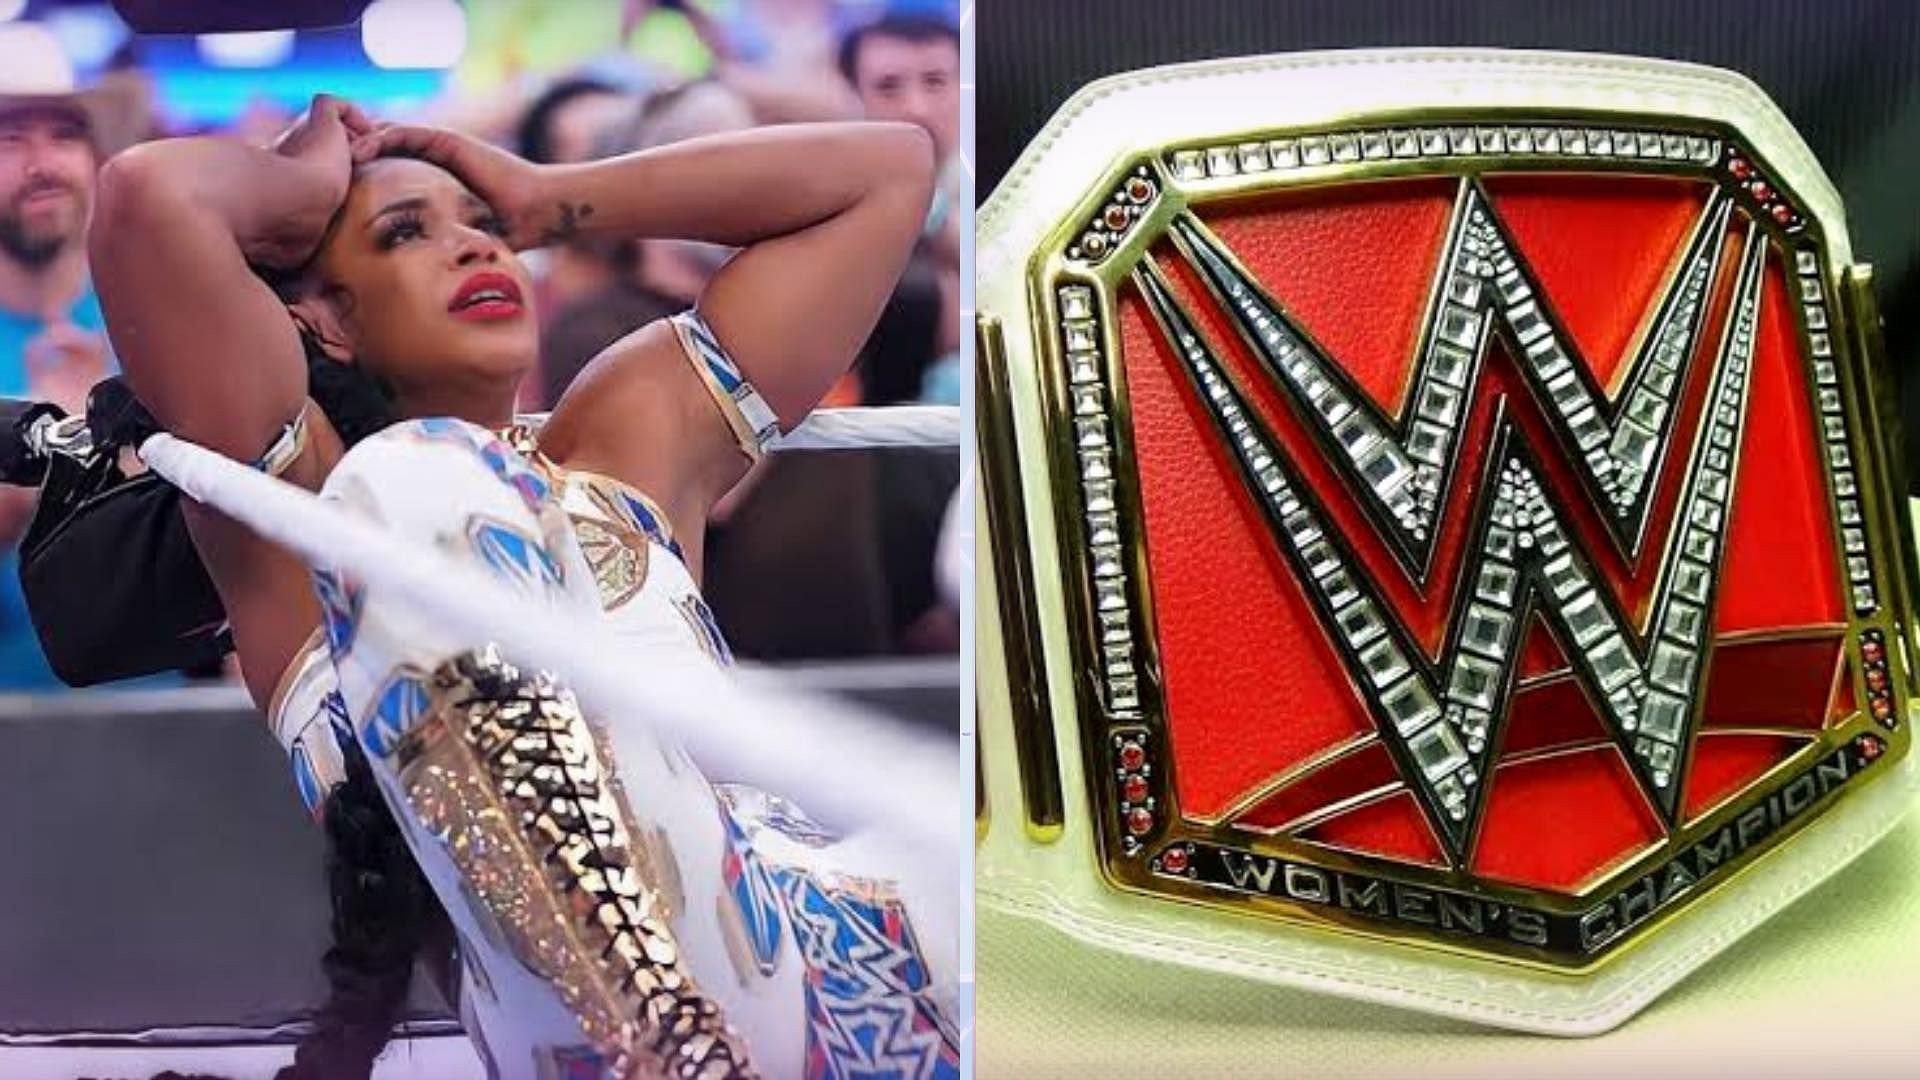 Bianca Belair has been on a dominant run in WWE so far